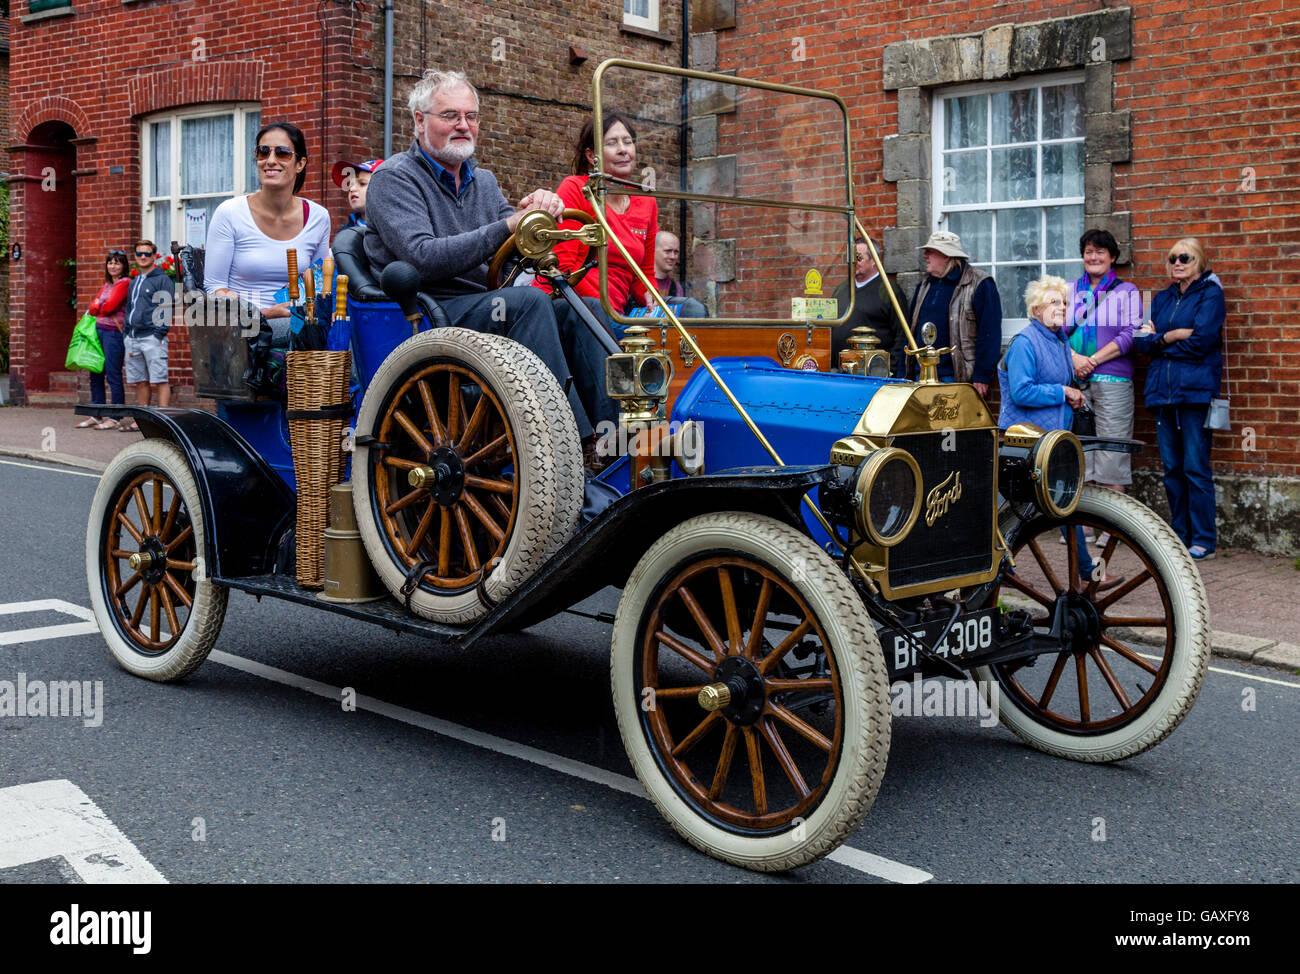 An Old Fashioned Car Takes Part In A Street Procession During The St Lawrence Fair, Hurstpierpoint, Sussex, UK Stock Photo